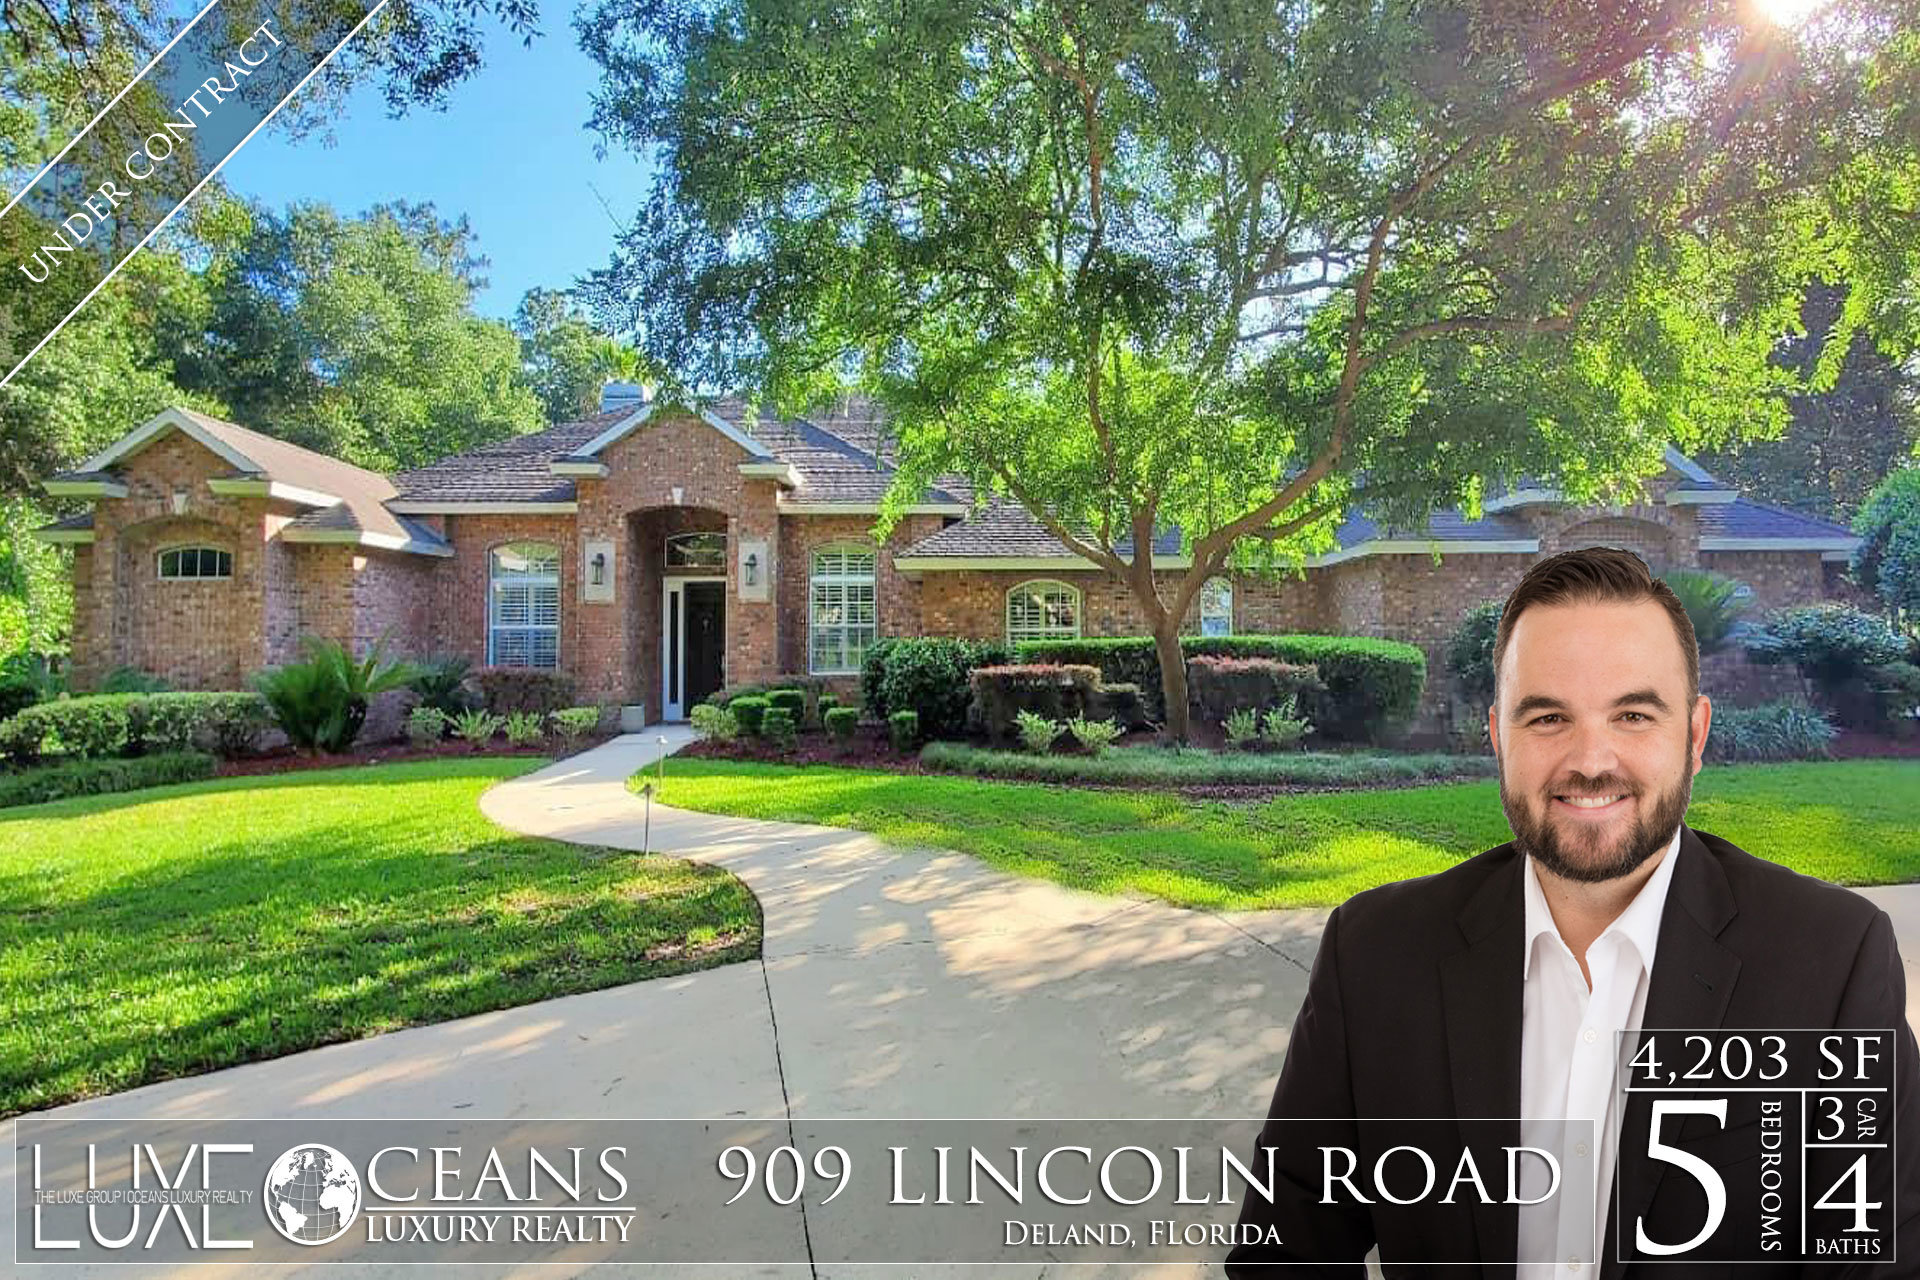 Deland Florida Real Estate For Sale.  909 Lincoln  RoadUnder Contract!